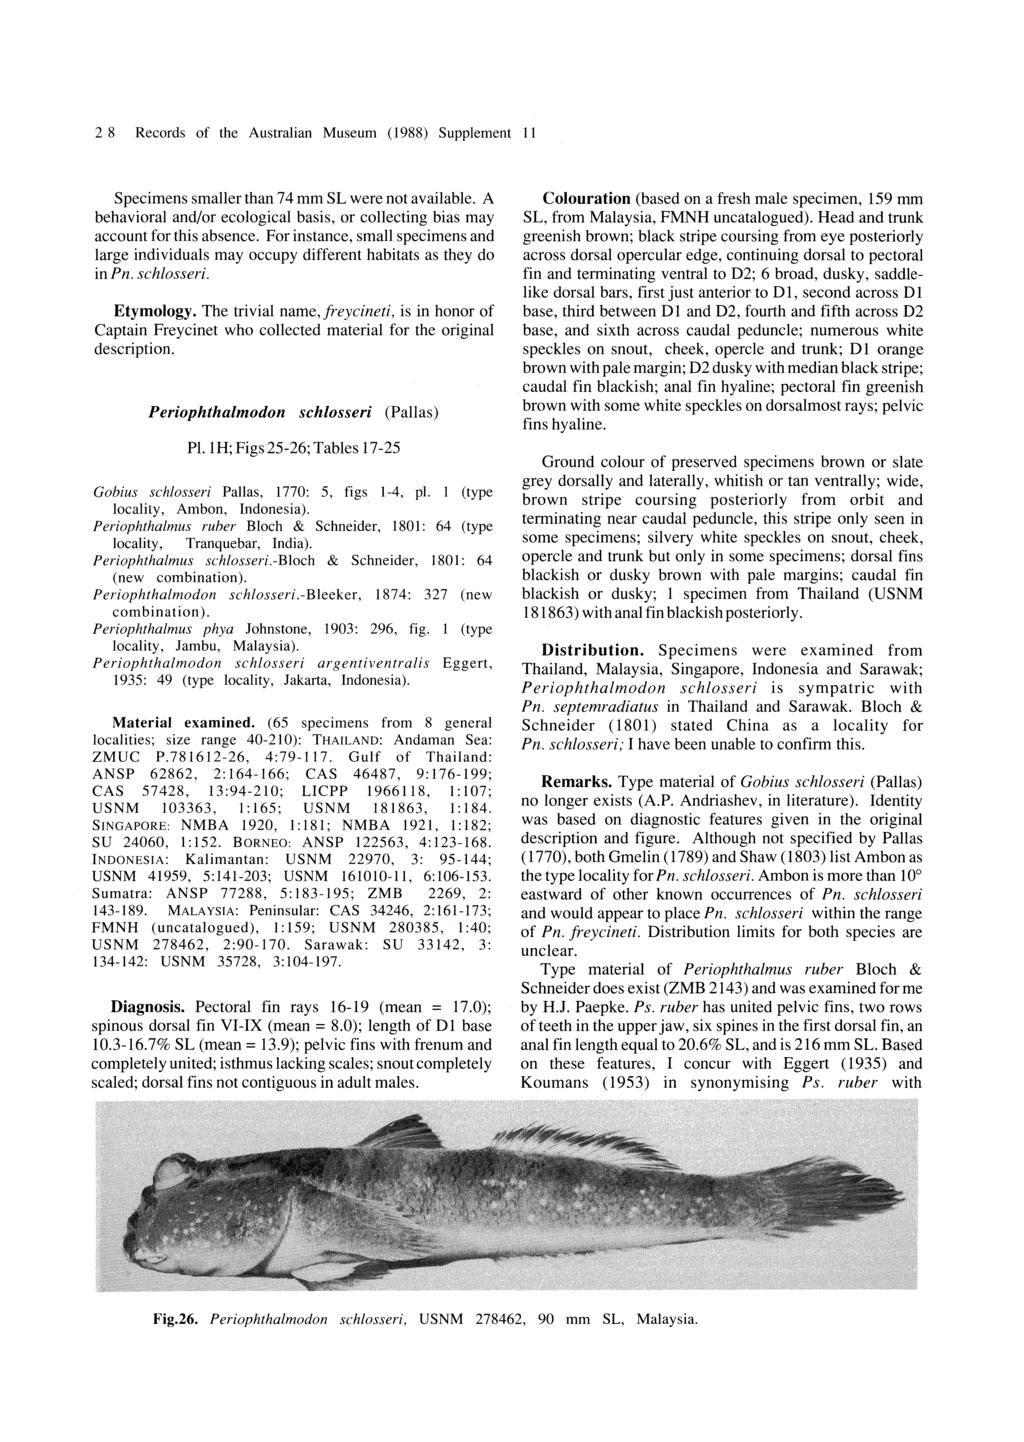 28 Records of the Australian Museum (1988) Supplement 11 Specimens smaller than 74 mm SL were not available. A behavioral and/or ecological basis, or collecting bias may account for this absence.